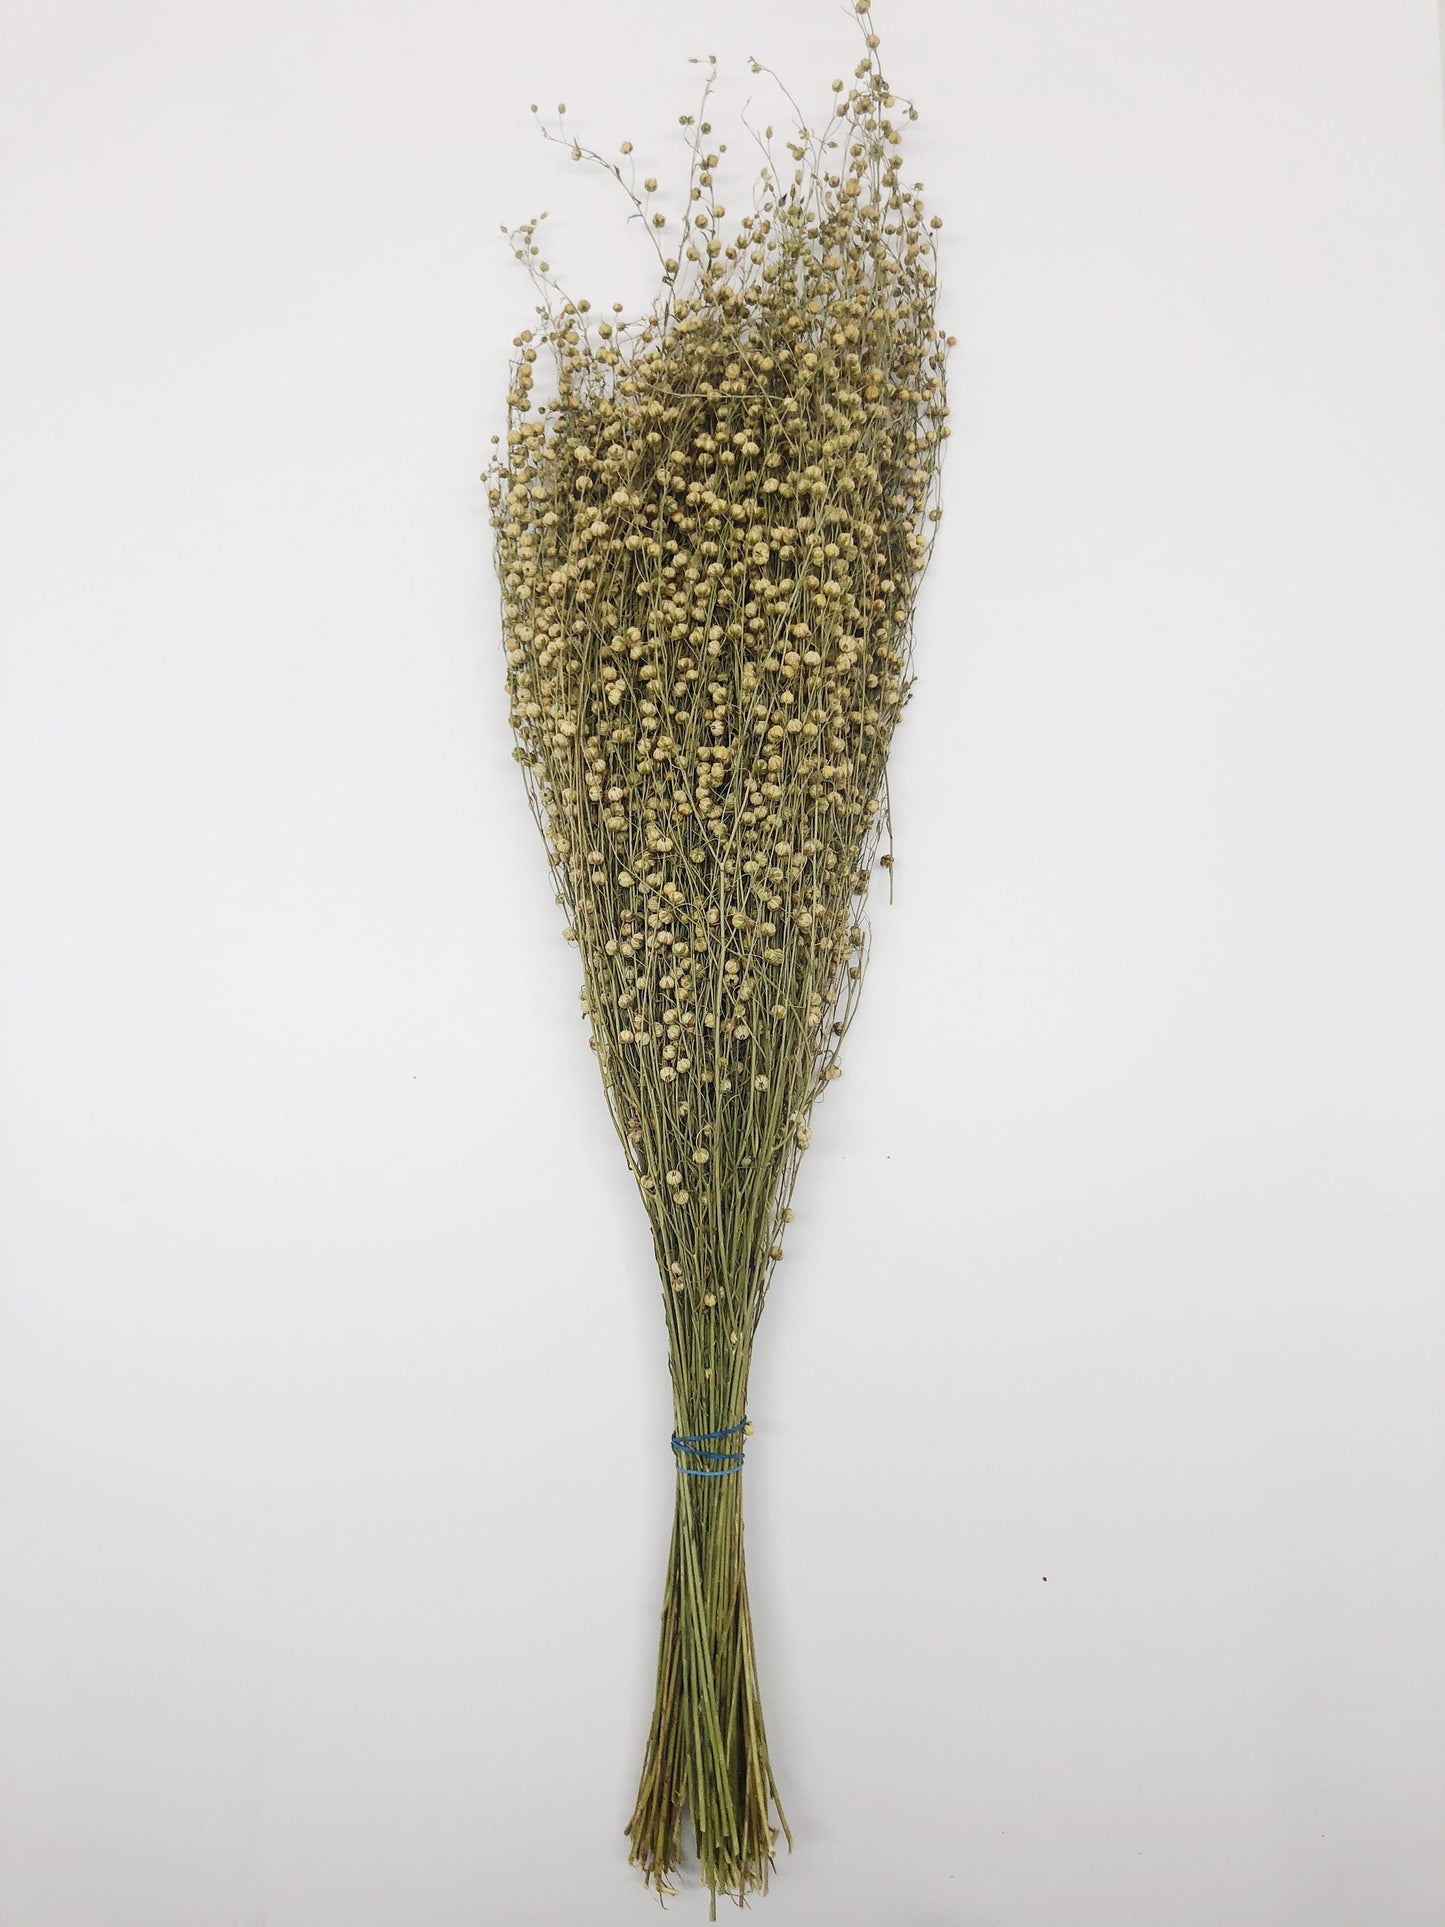 Flax, Dried Wheat, Yellow, Grain, Field, Filler Flowers, Wedding Flowers, Floral Arrangements, Country Style, Round, Wild Flowers